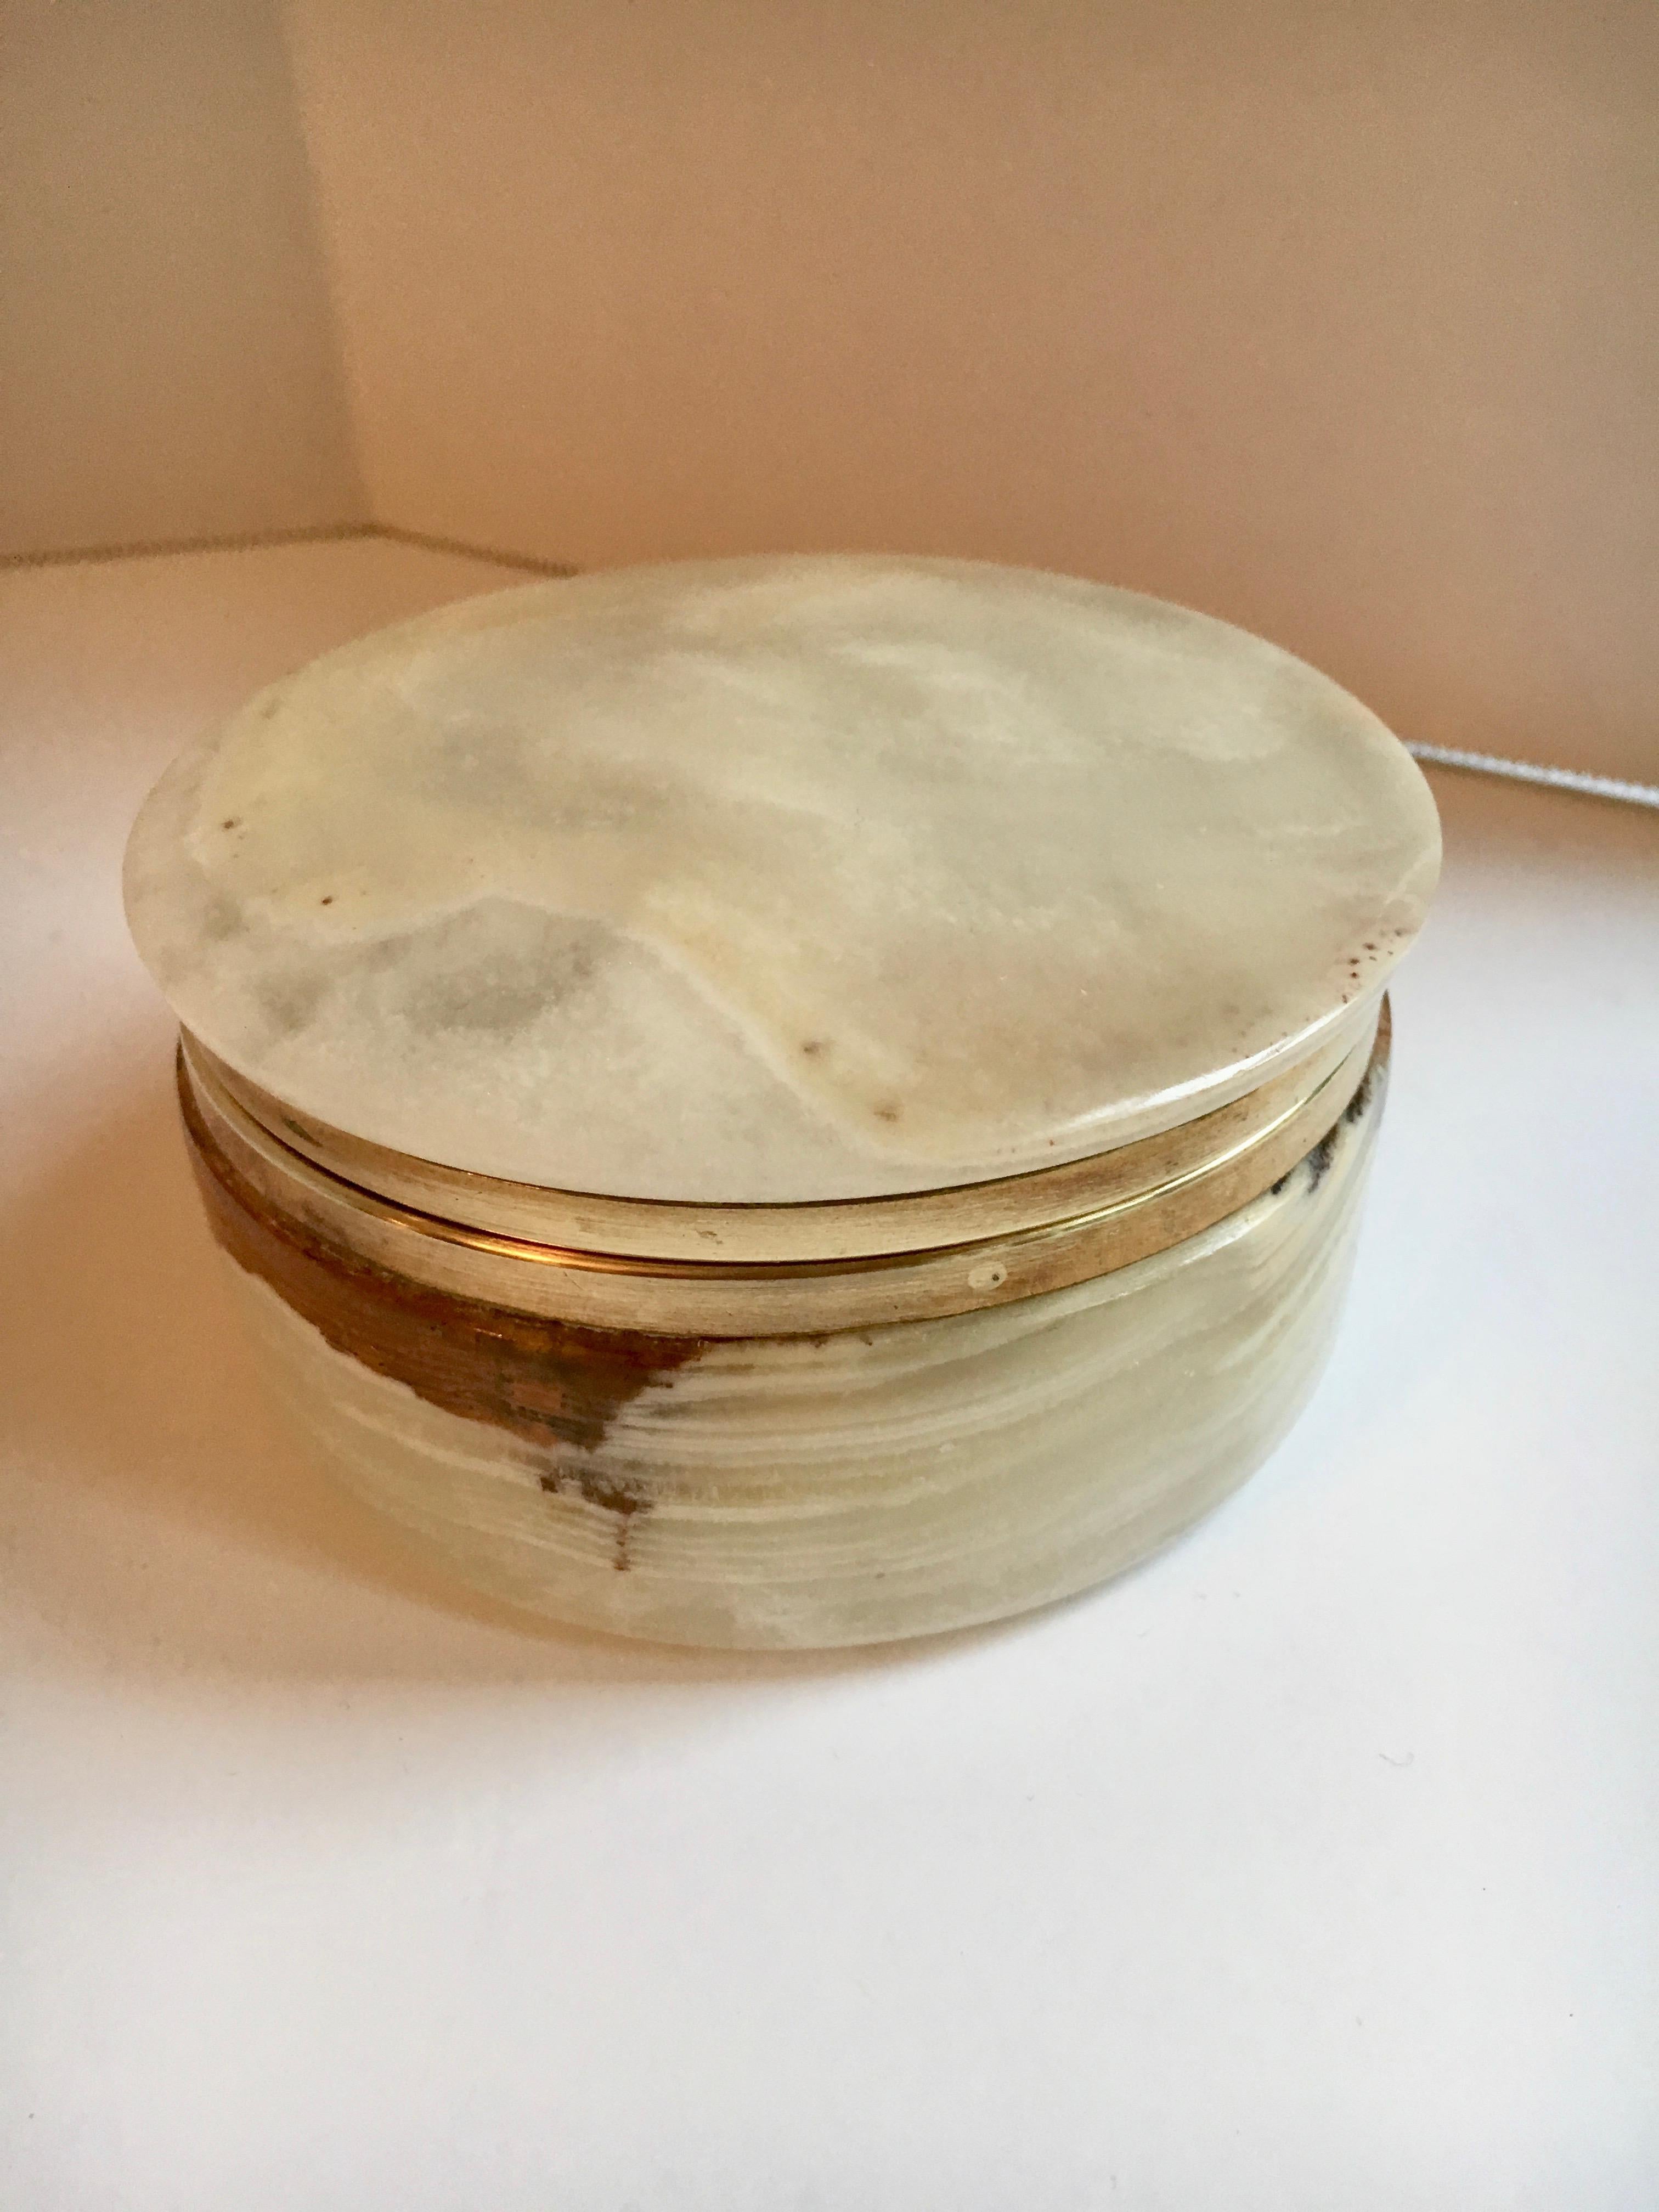 A handsome round Alabaster box suitable for anything from jewelry to men’s pieces or paper clips!